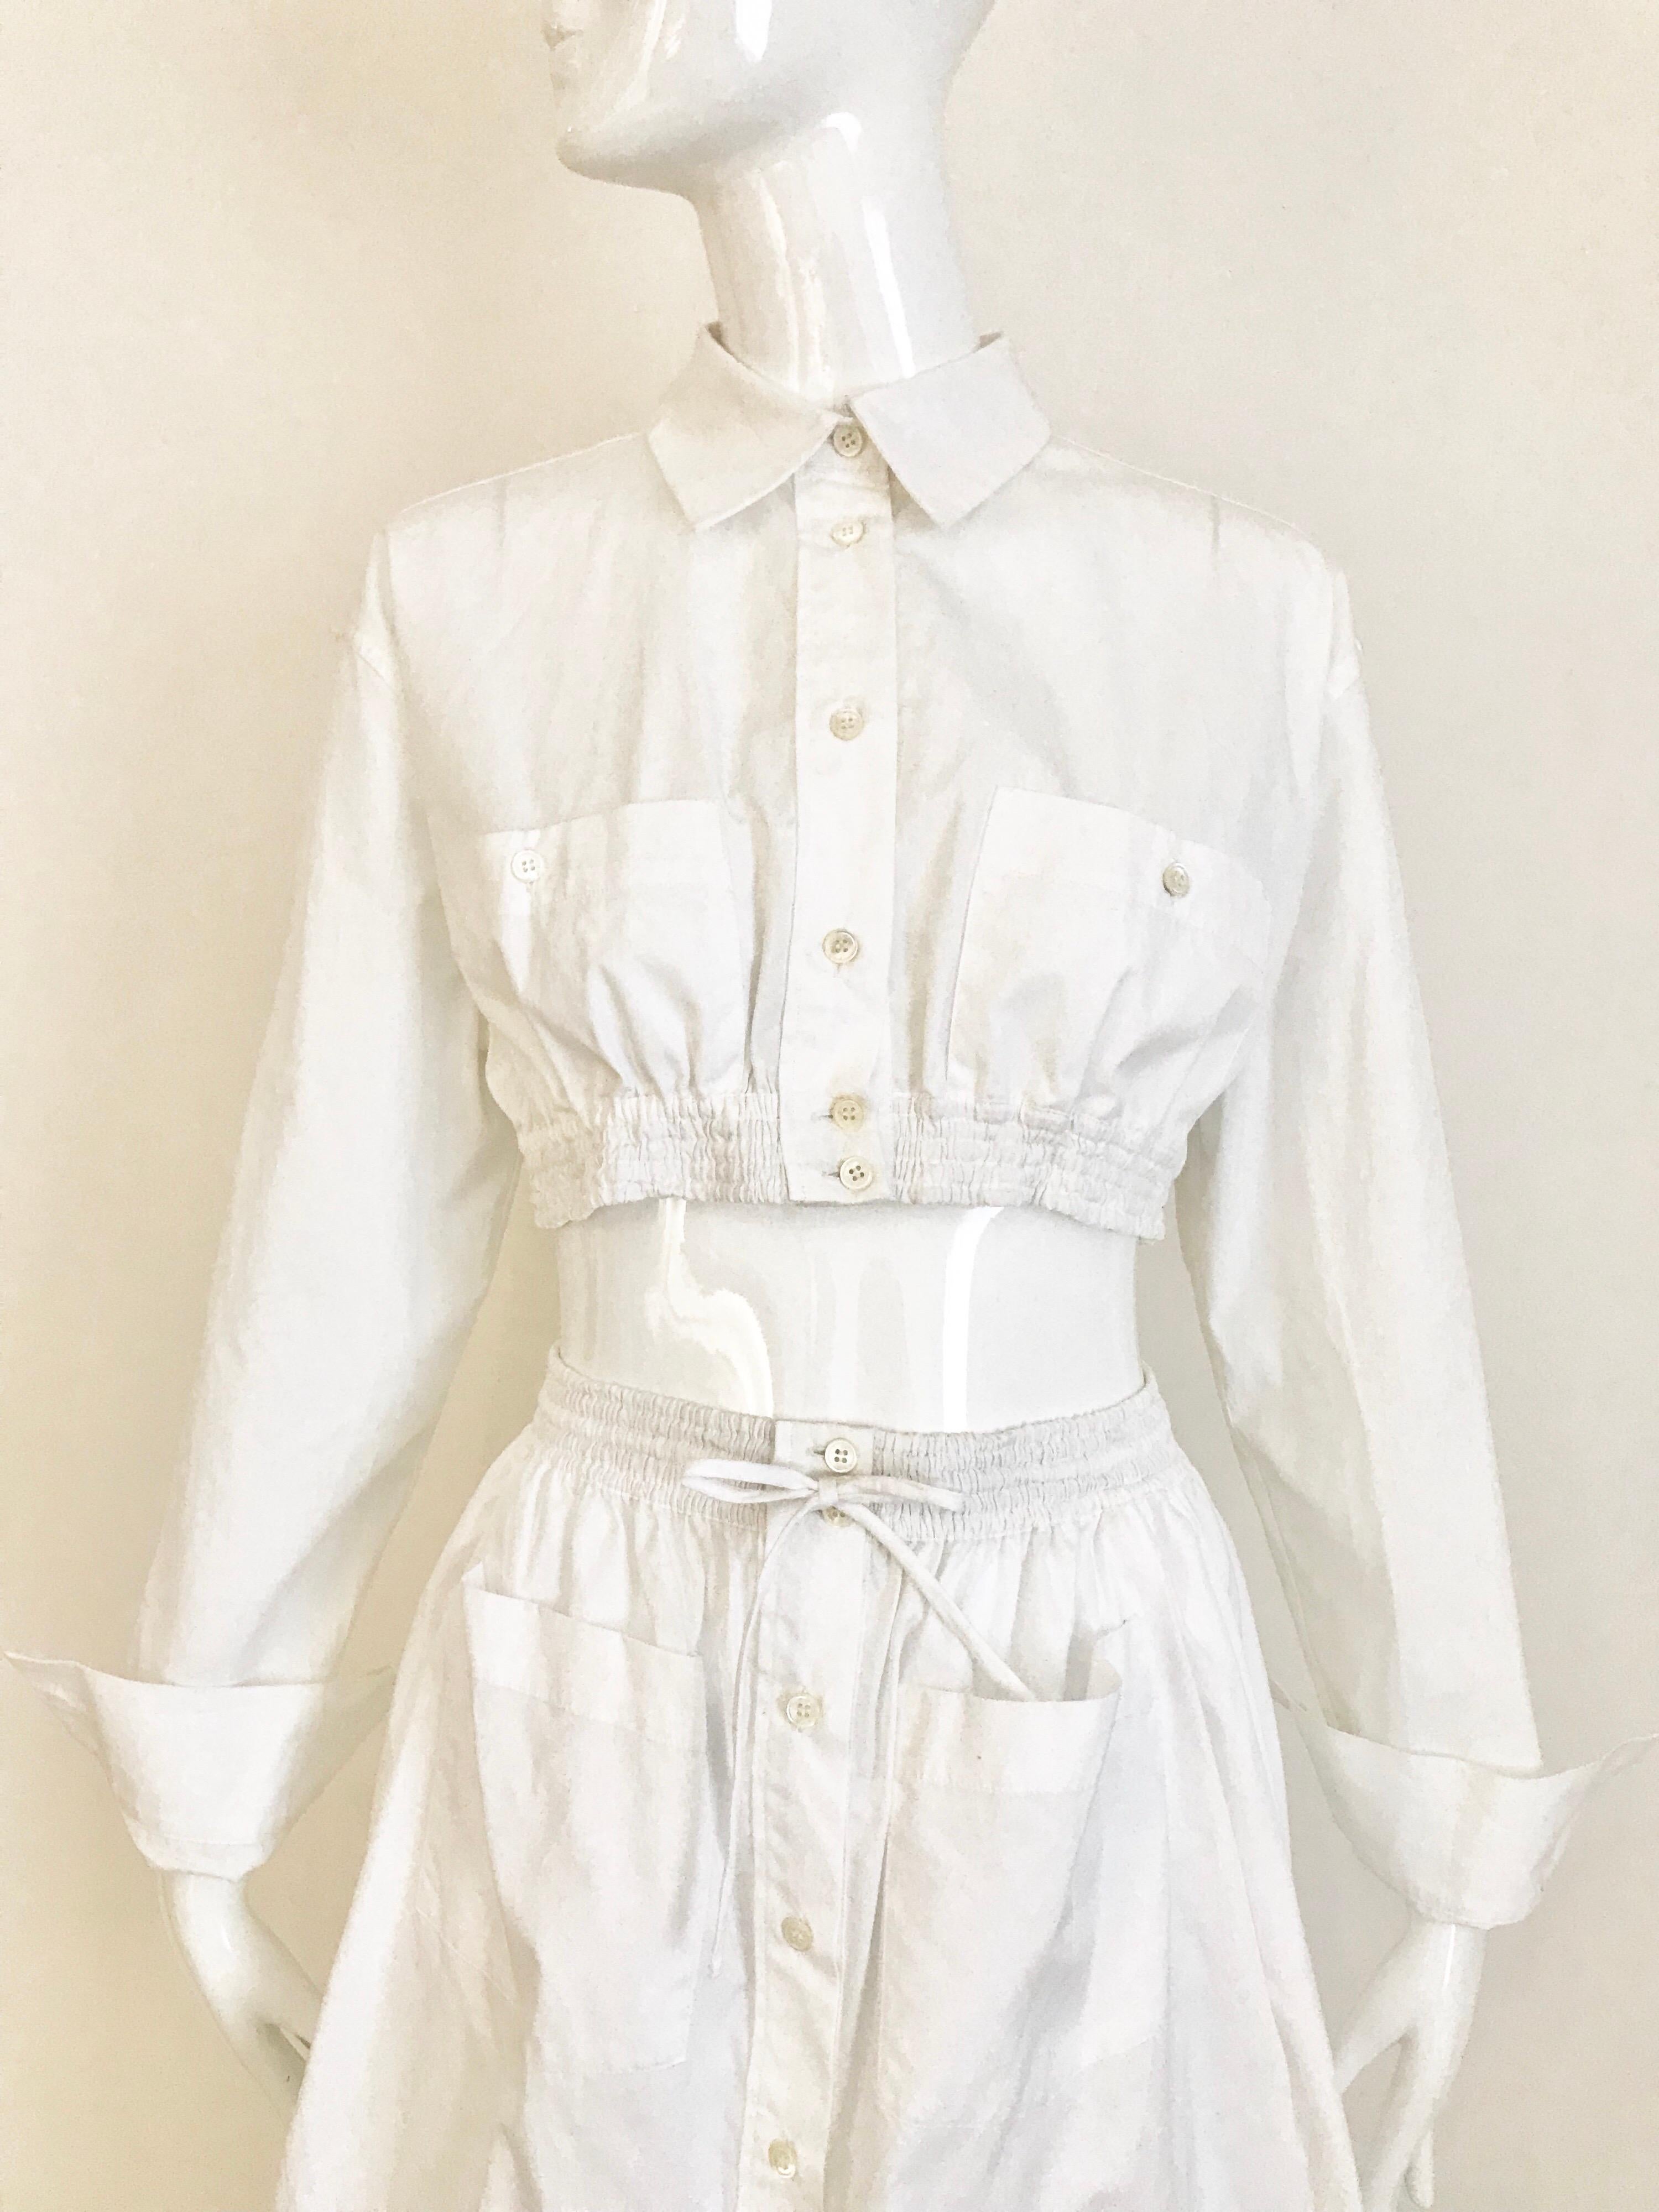 Jean Paul Gaultier White Cotton Crop Top and Skirt 2